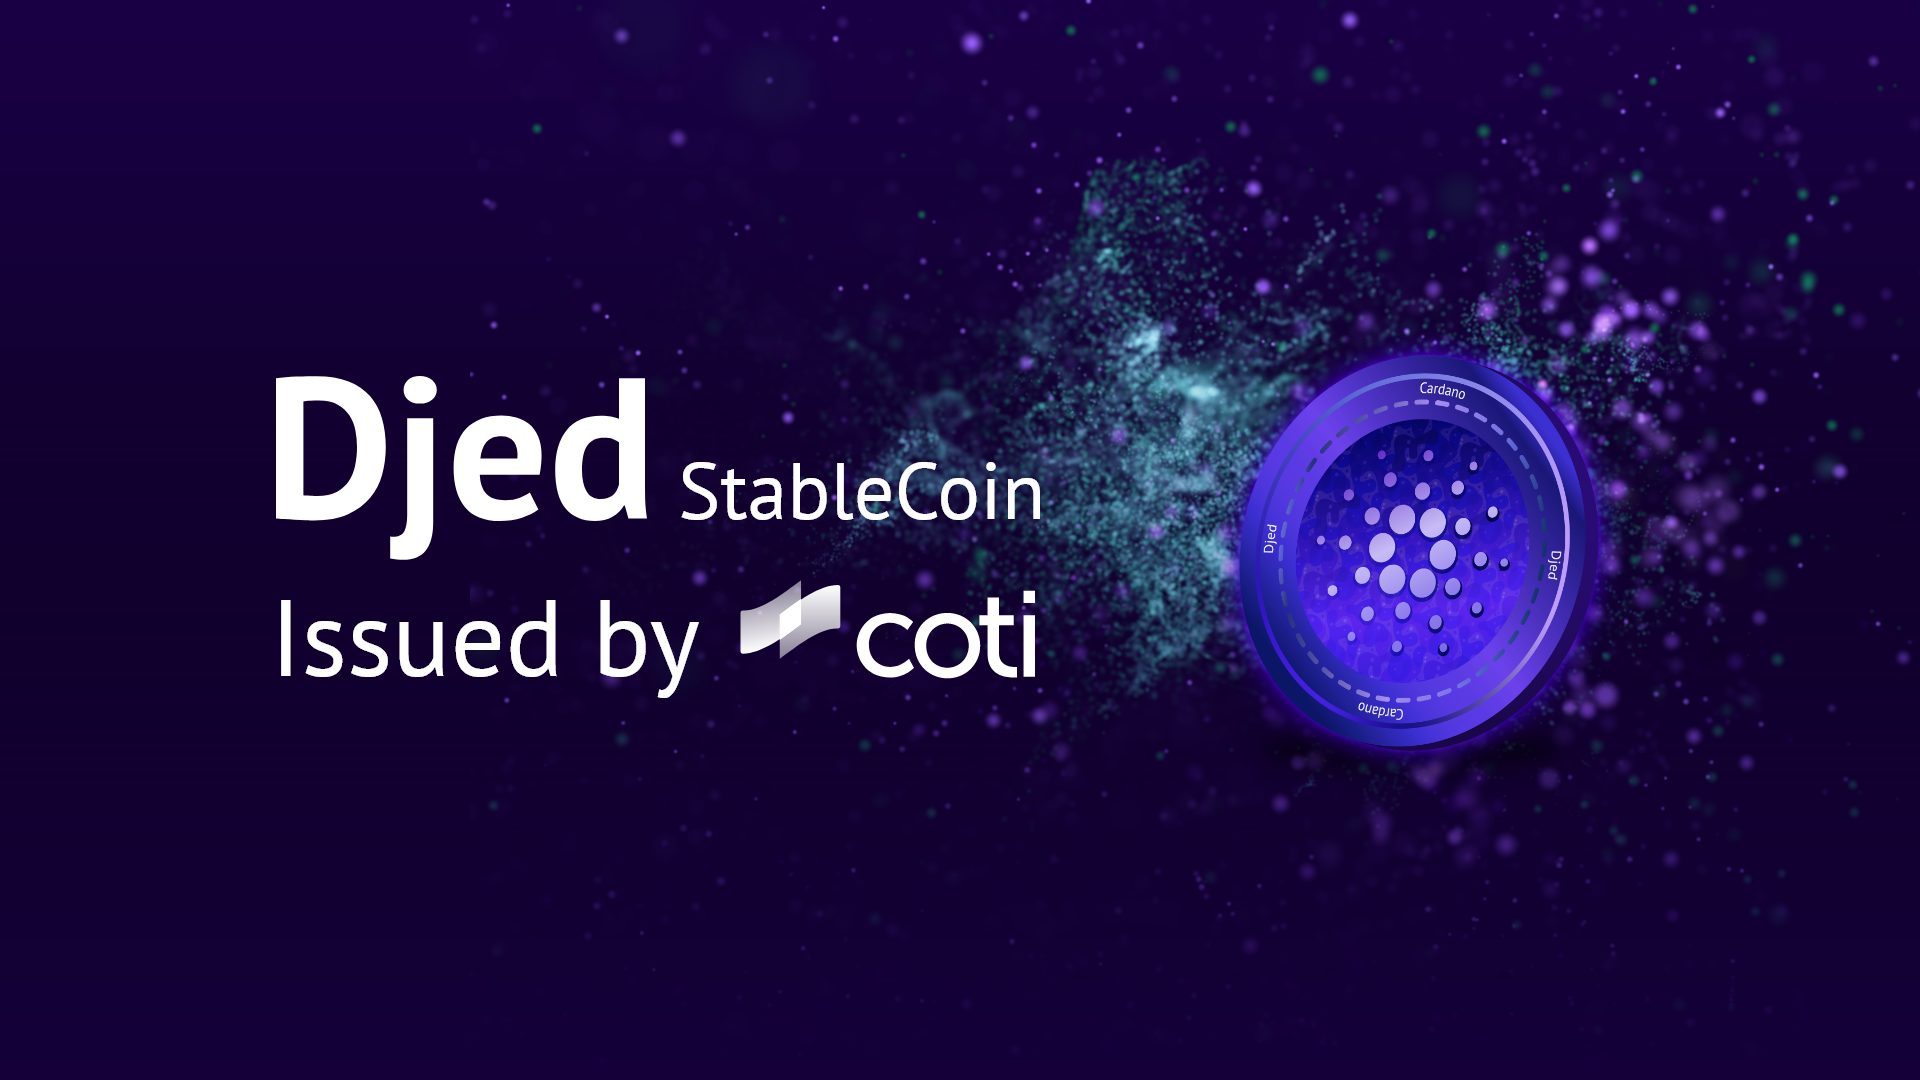 Djed Stablecoin issued by Coti